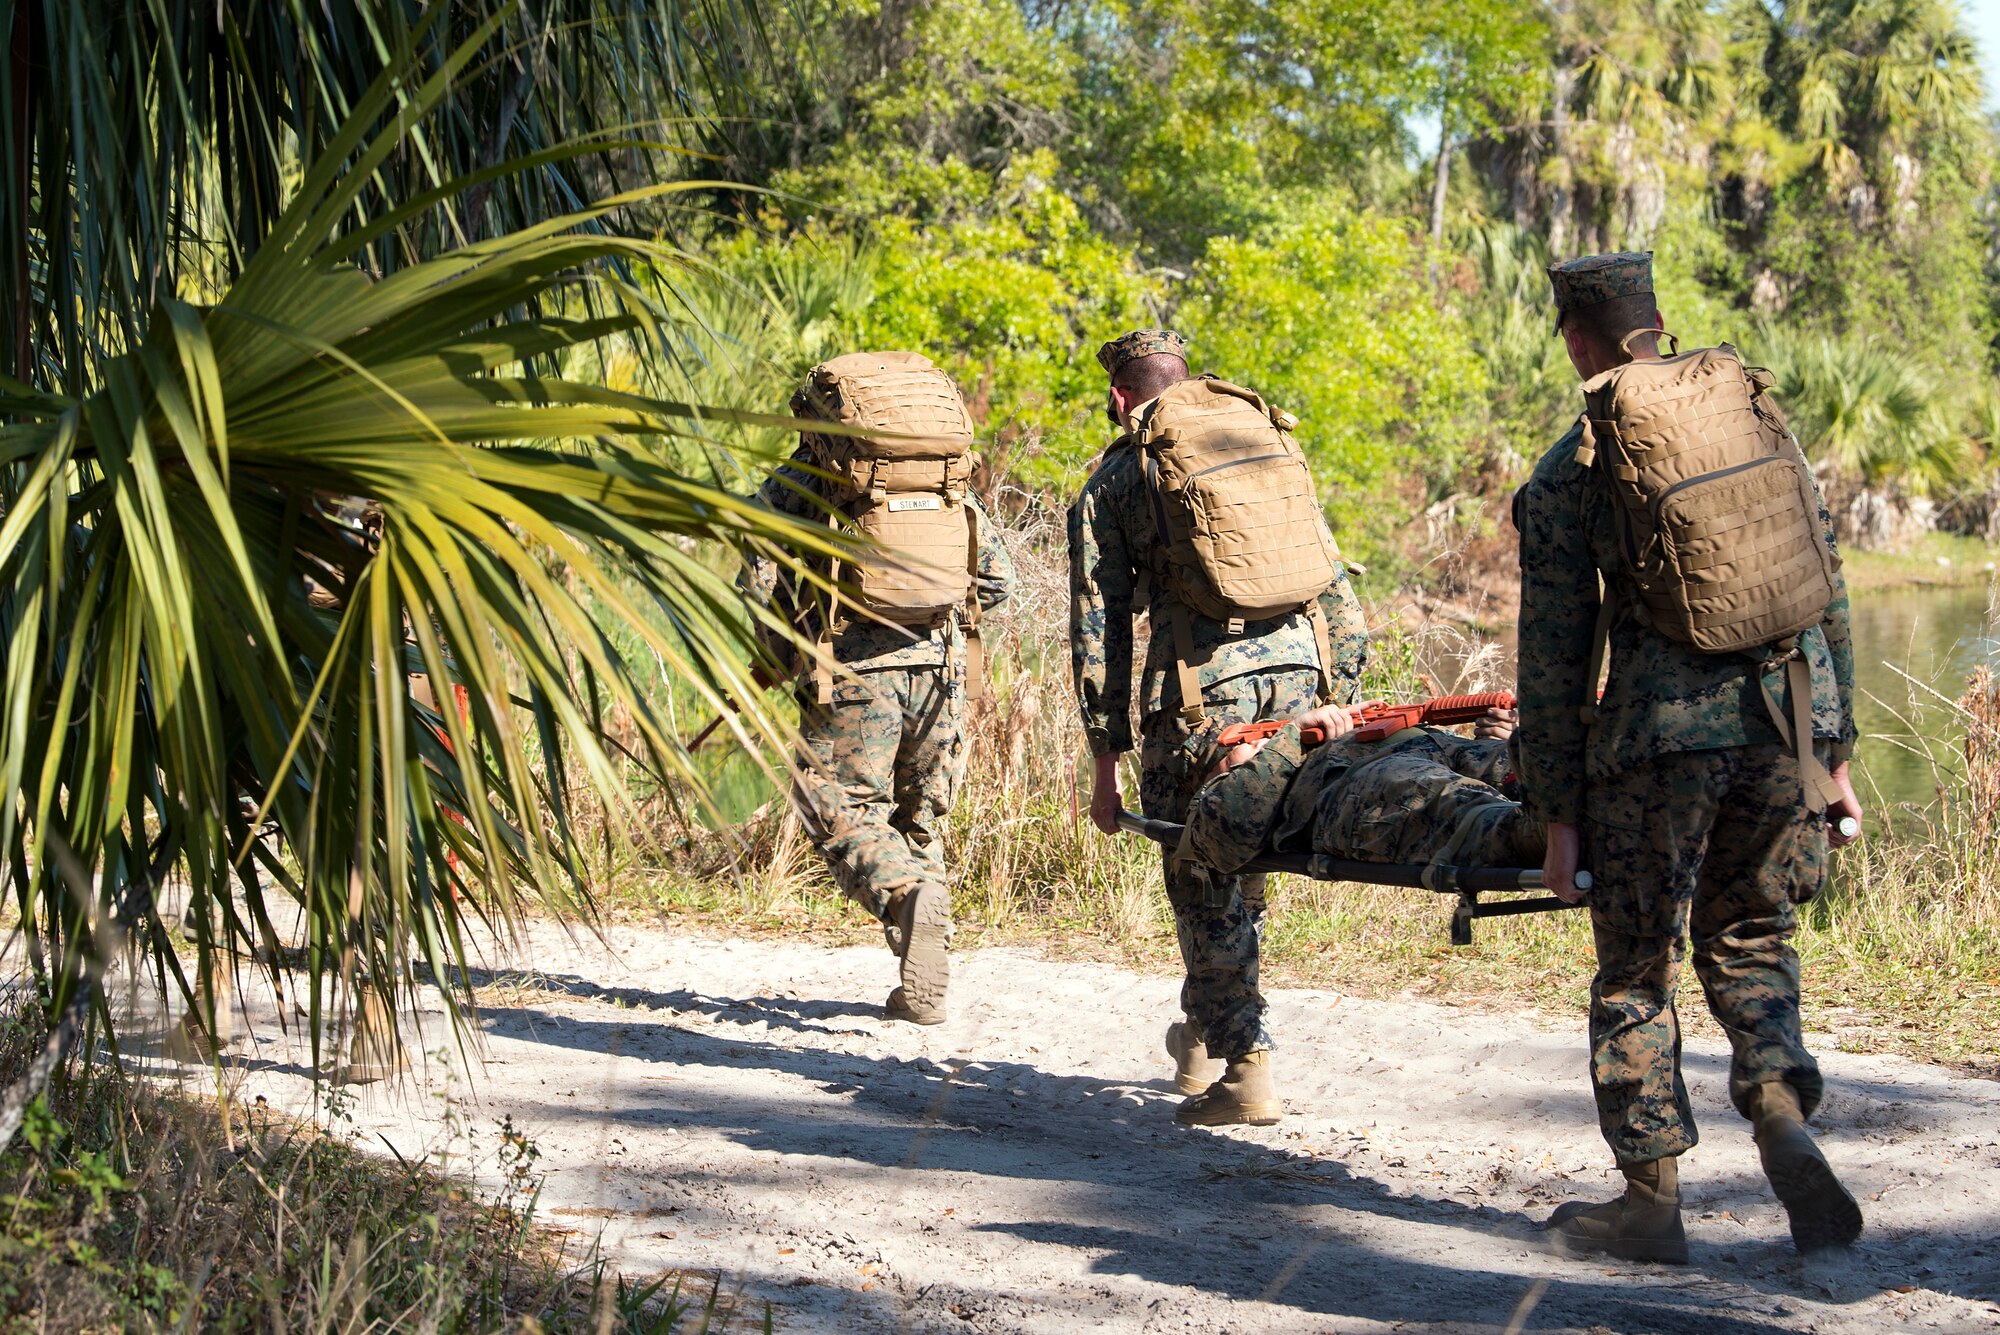 U.S. Marines carry a simulated victim during a U.S. Marine Corps Forces Central Command noncommissioned officer field exercise at MacDill Air Force Base, Fla., March 14-15, 2018. As part of the exercise, Marines participated in various practical scenarios such as land navigation, patrolling and medical emergencies.